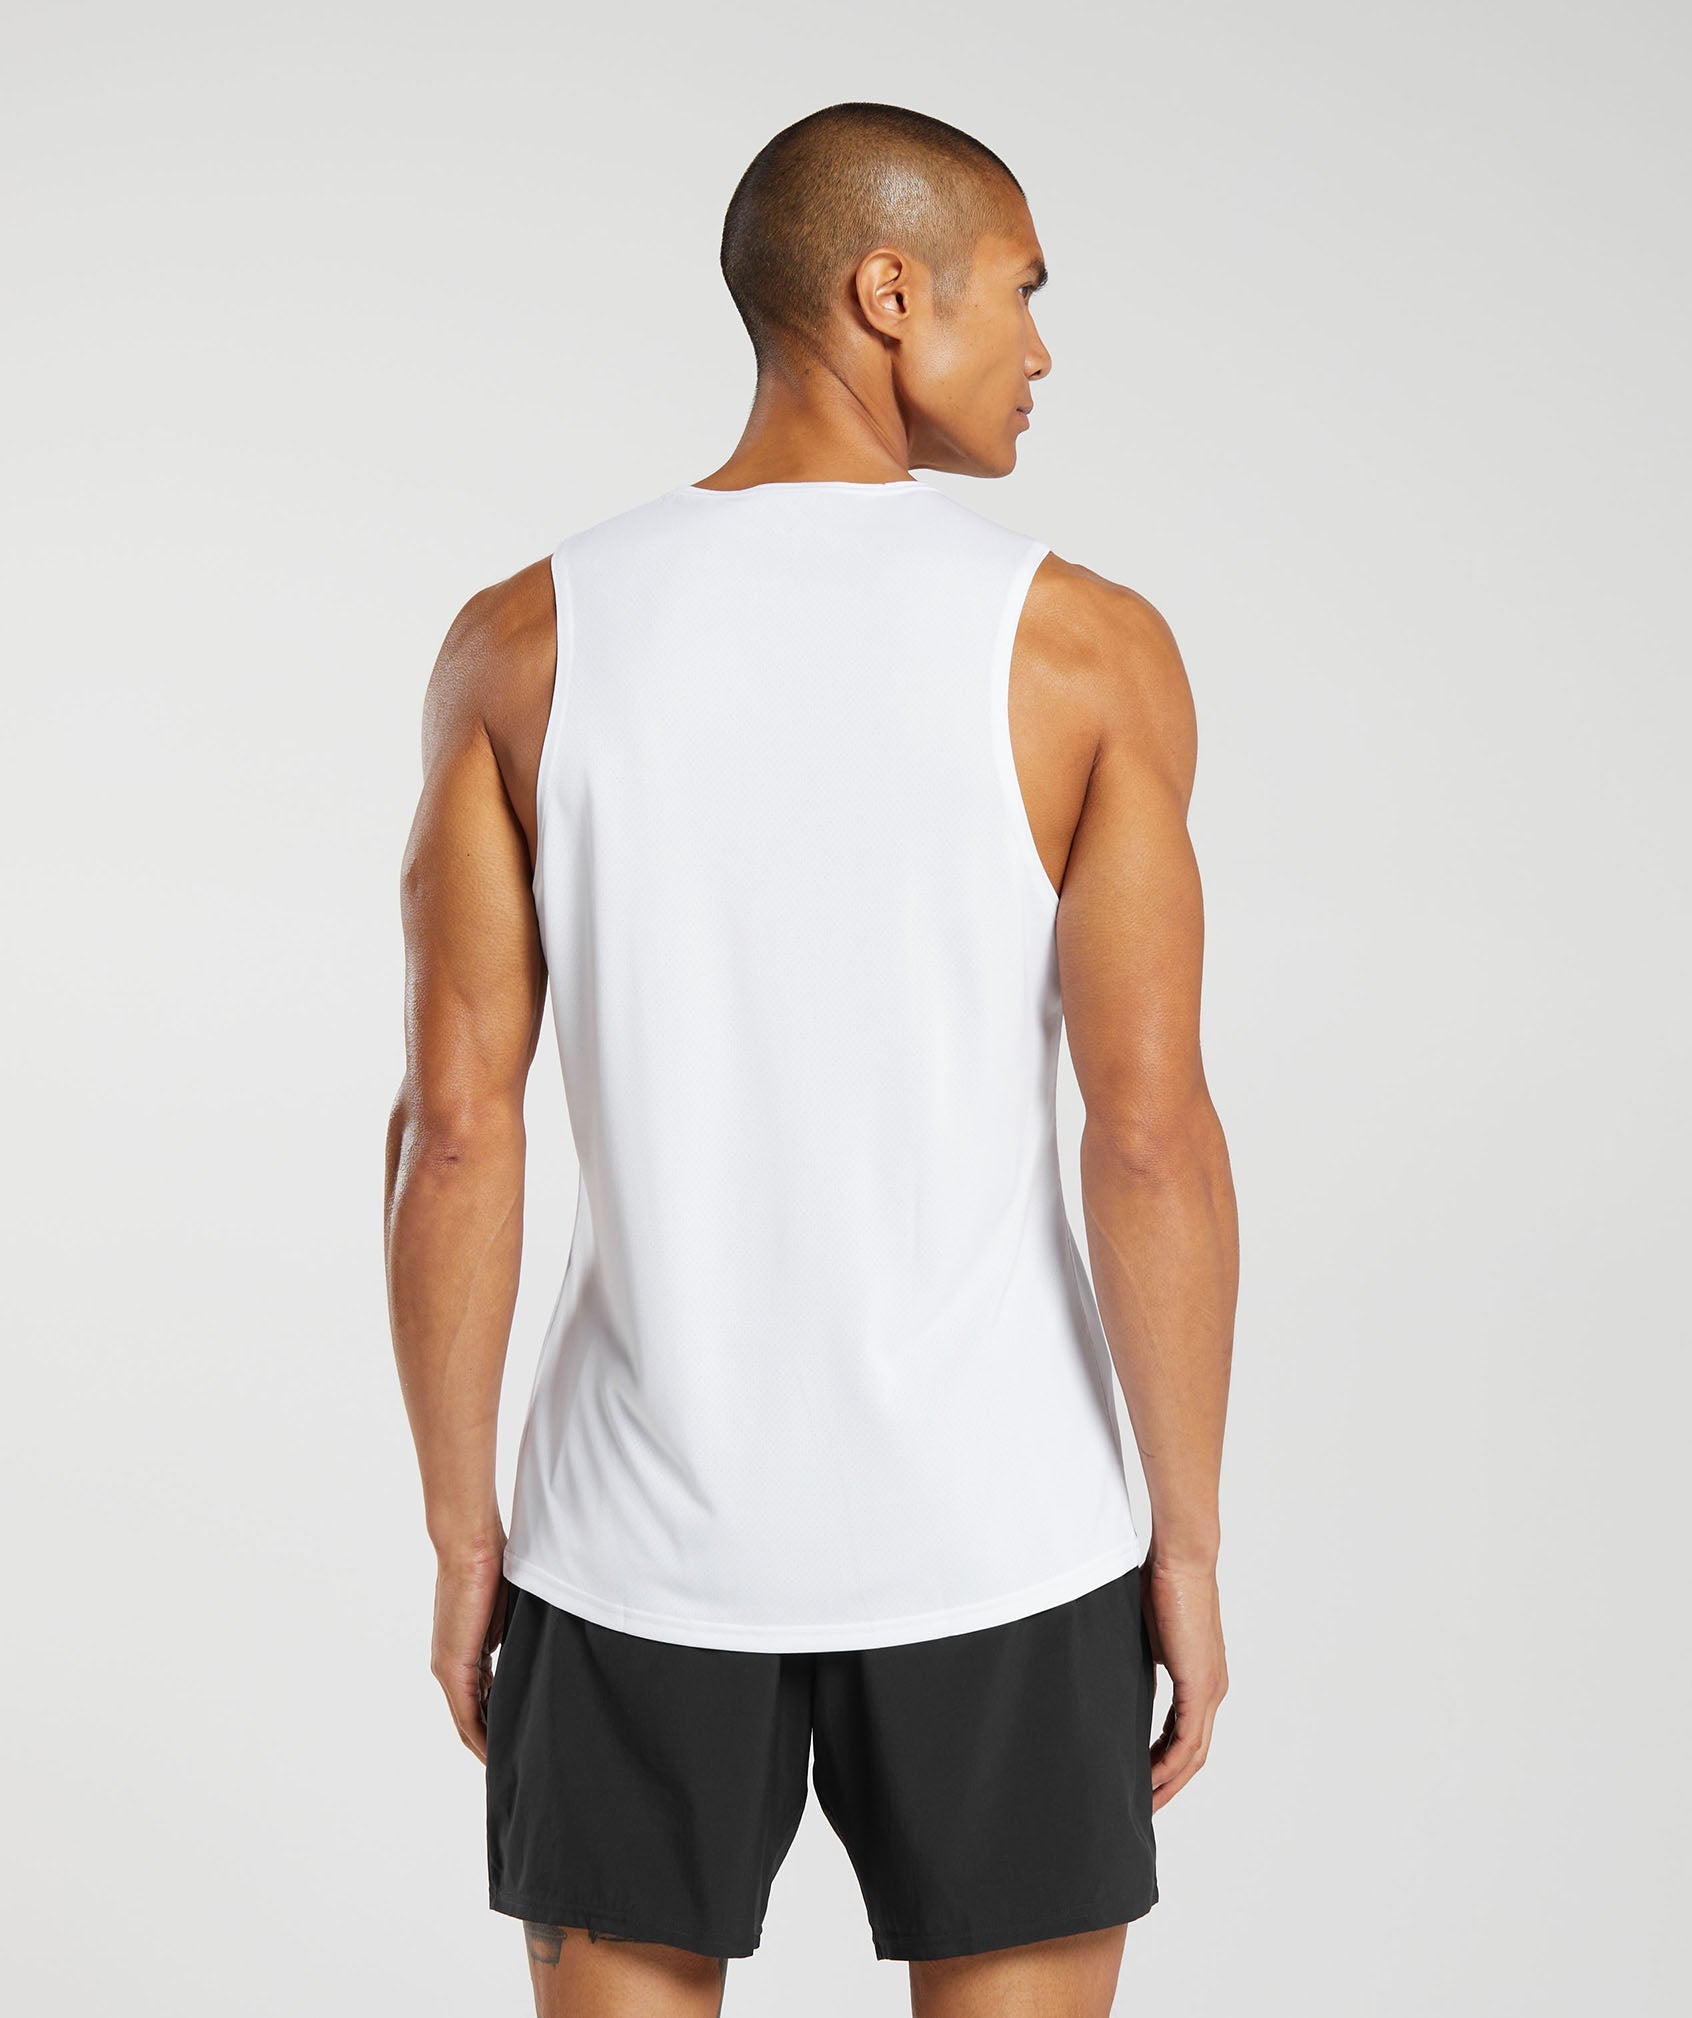 Arrival Tank in White - view 2